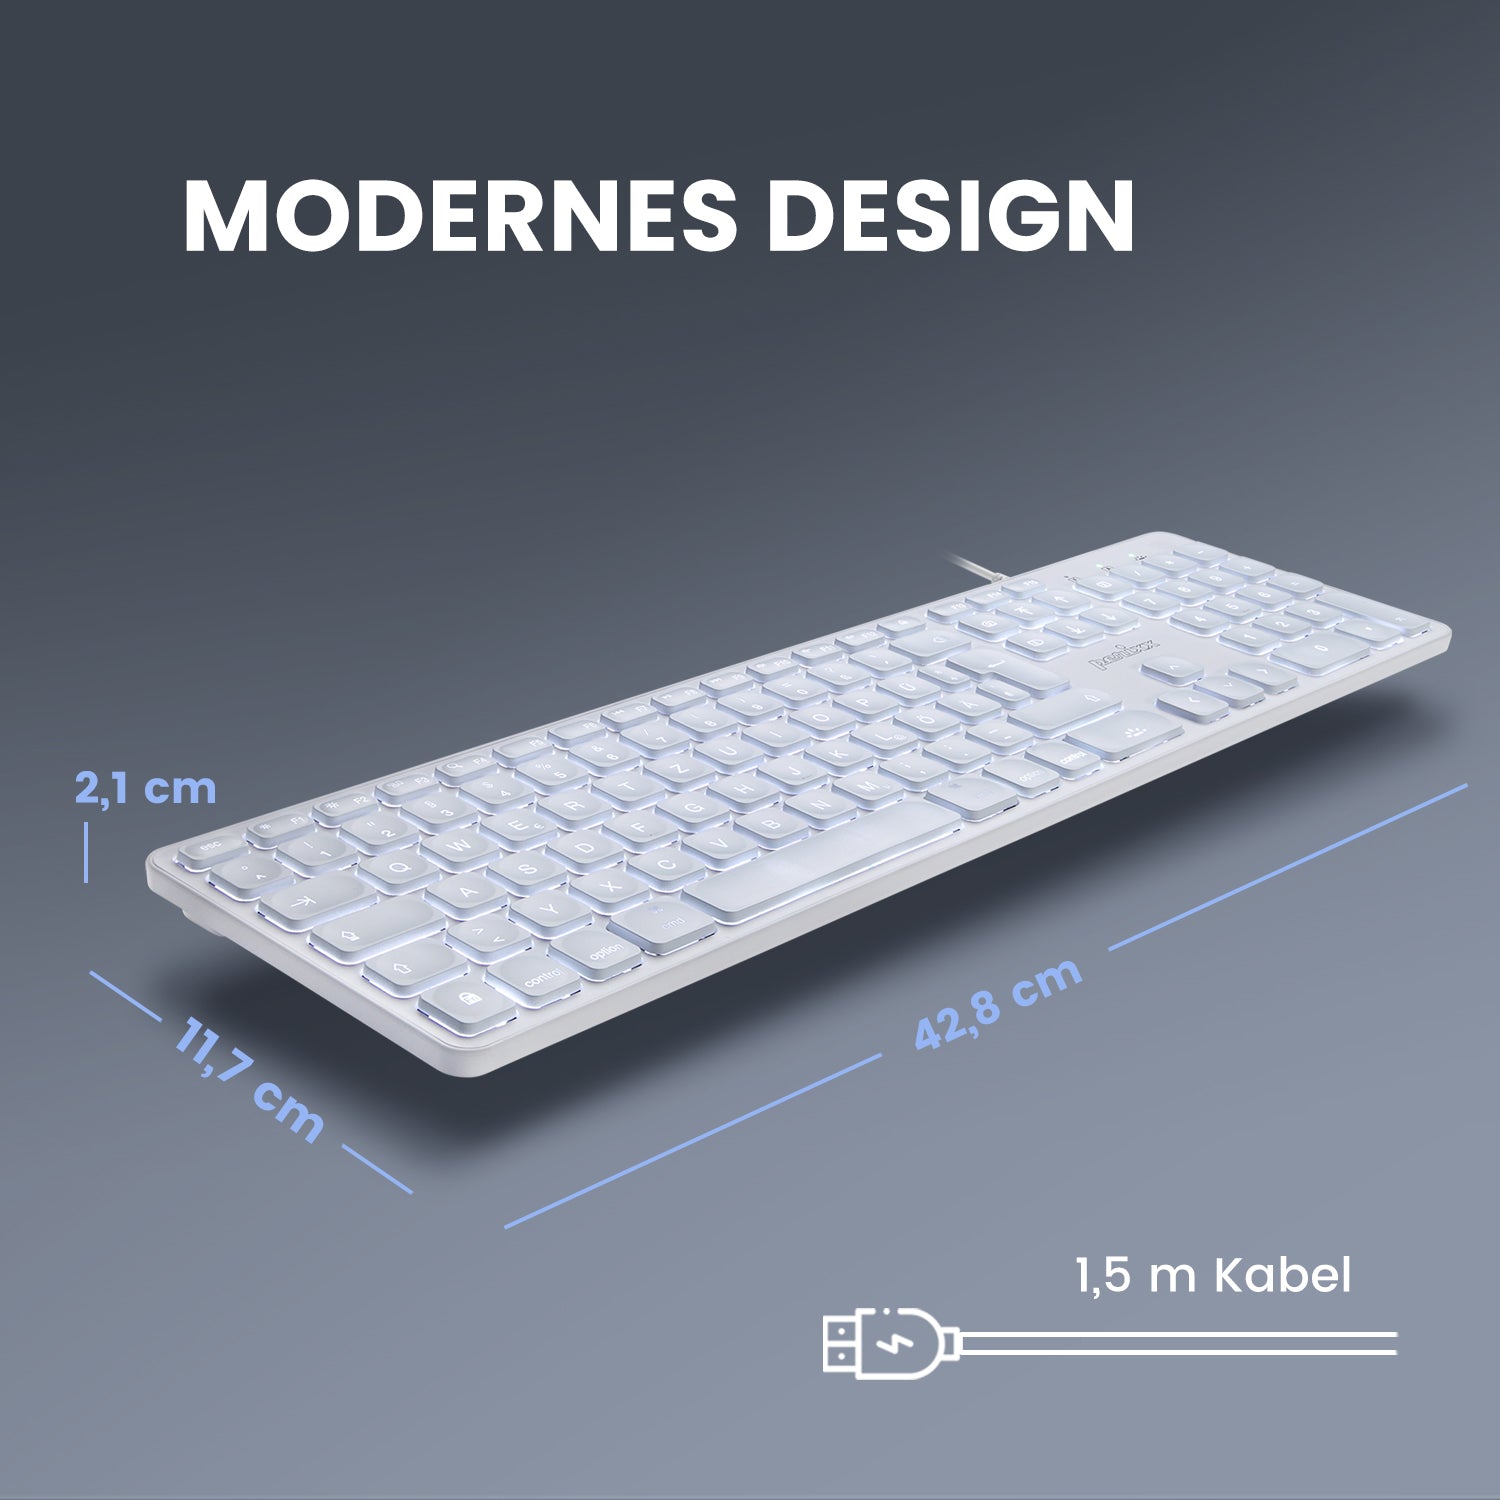 PERIBOARD-331M - Wired Backlit Scissor Keyboard with Large Print Letters for Mac - Perixx Europe